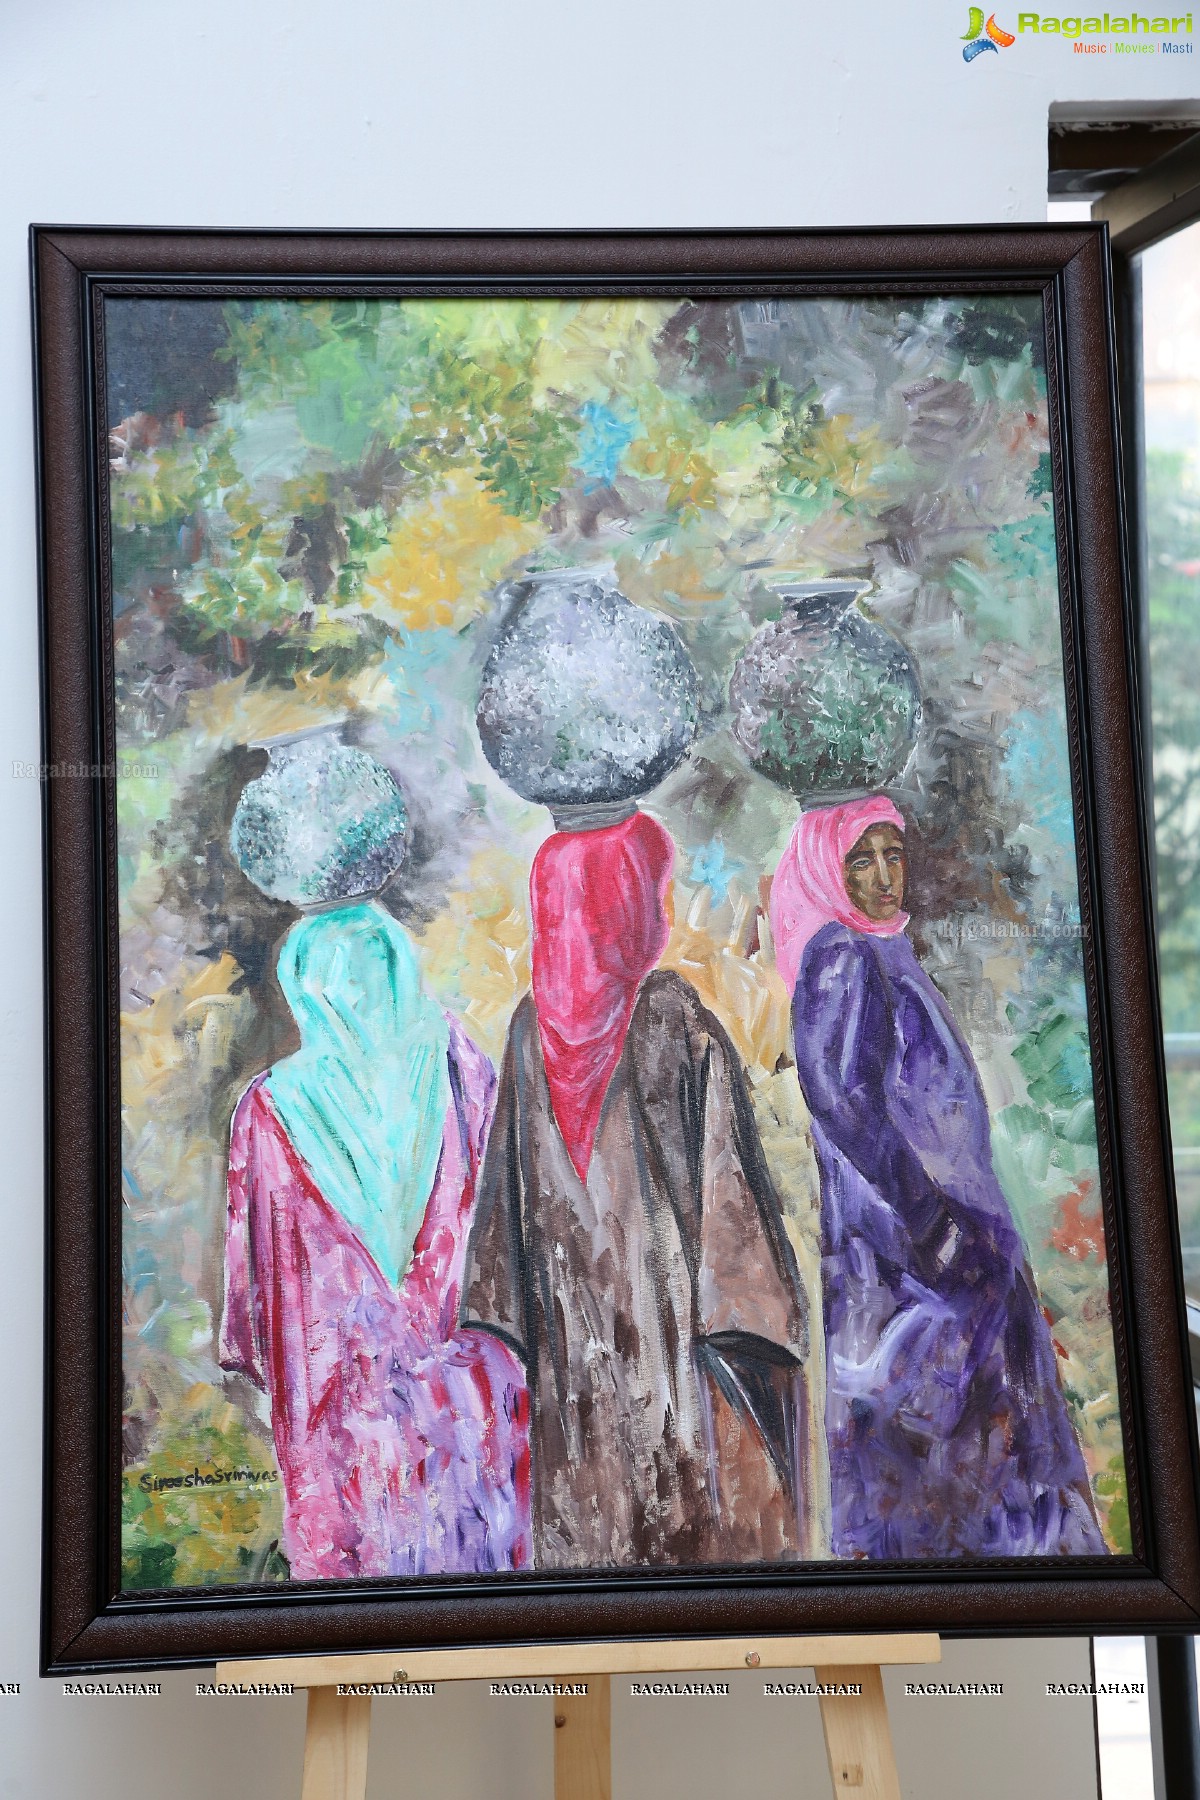 Reminiscences - Kashmir on Canvas Art Exhibition for a Cause at State Art Gallery